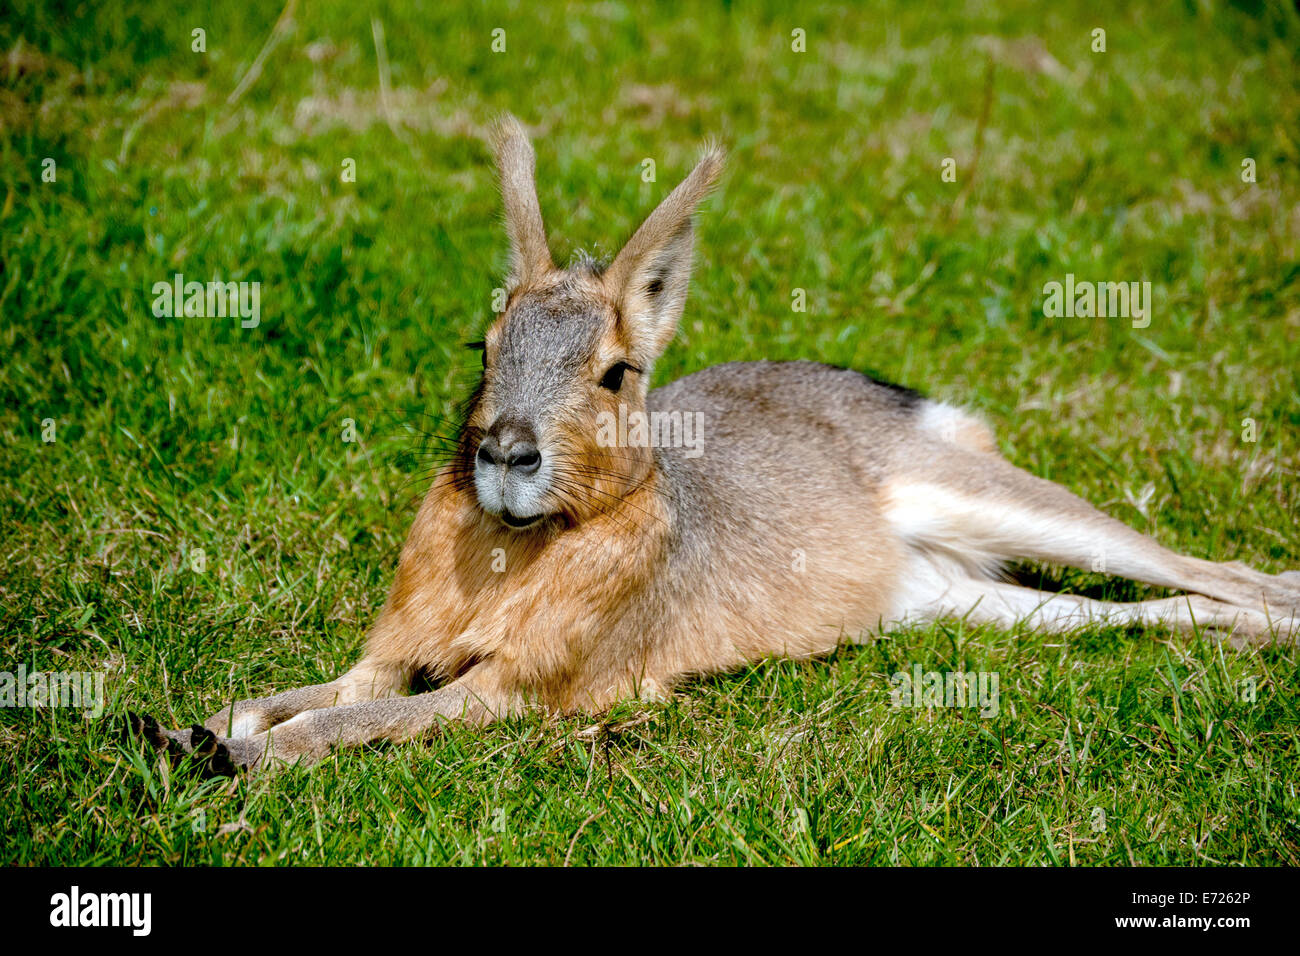 A Patagonian Mara,  in Whipsnade Zoo, Dunstable, Bedfordshire, United Kingdom Stock Photo